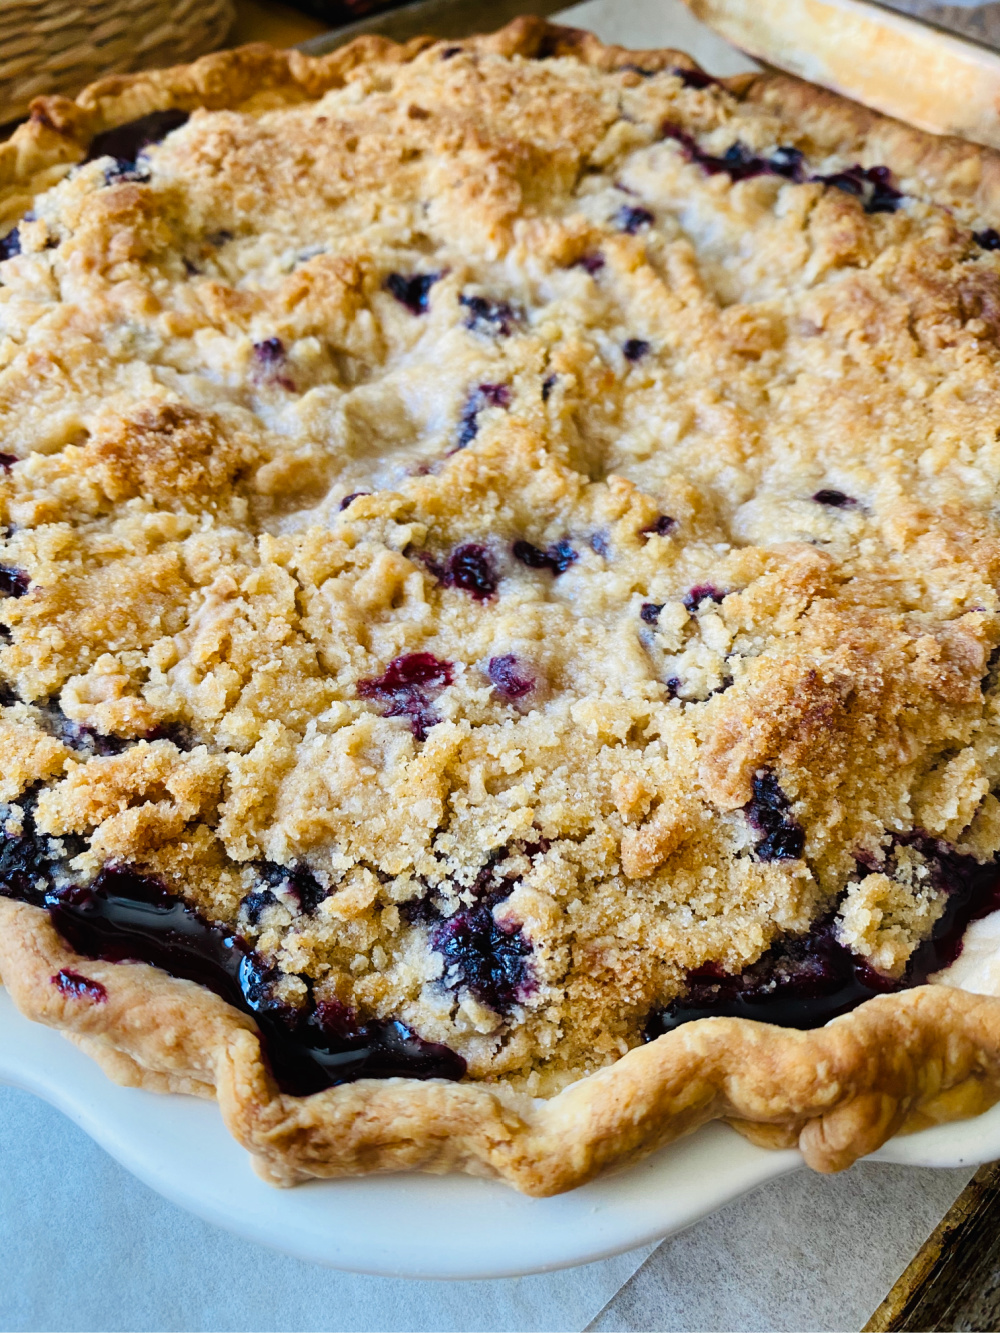 Blueberry Pie with Crumb Topping | My Other More Exciting Self